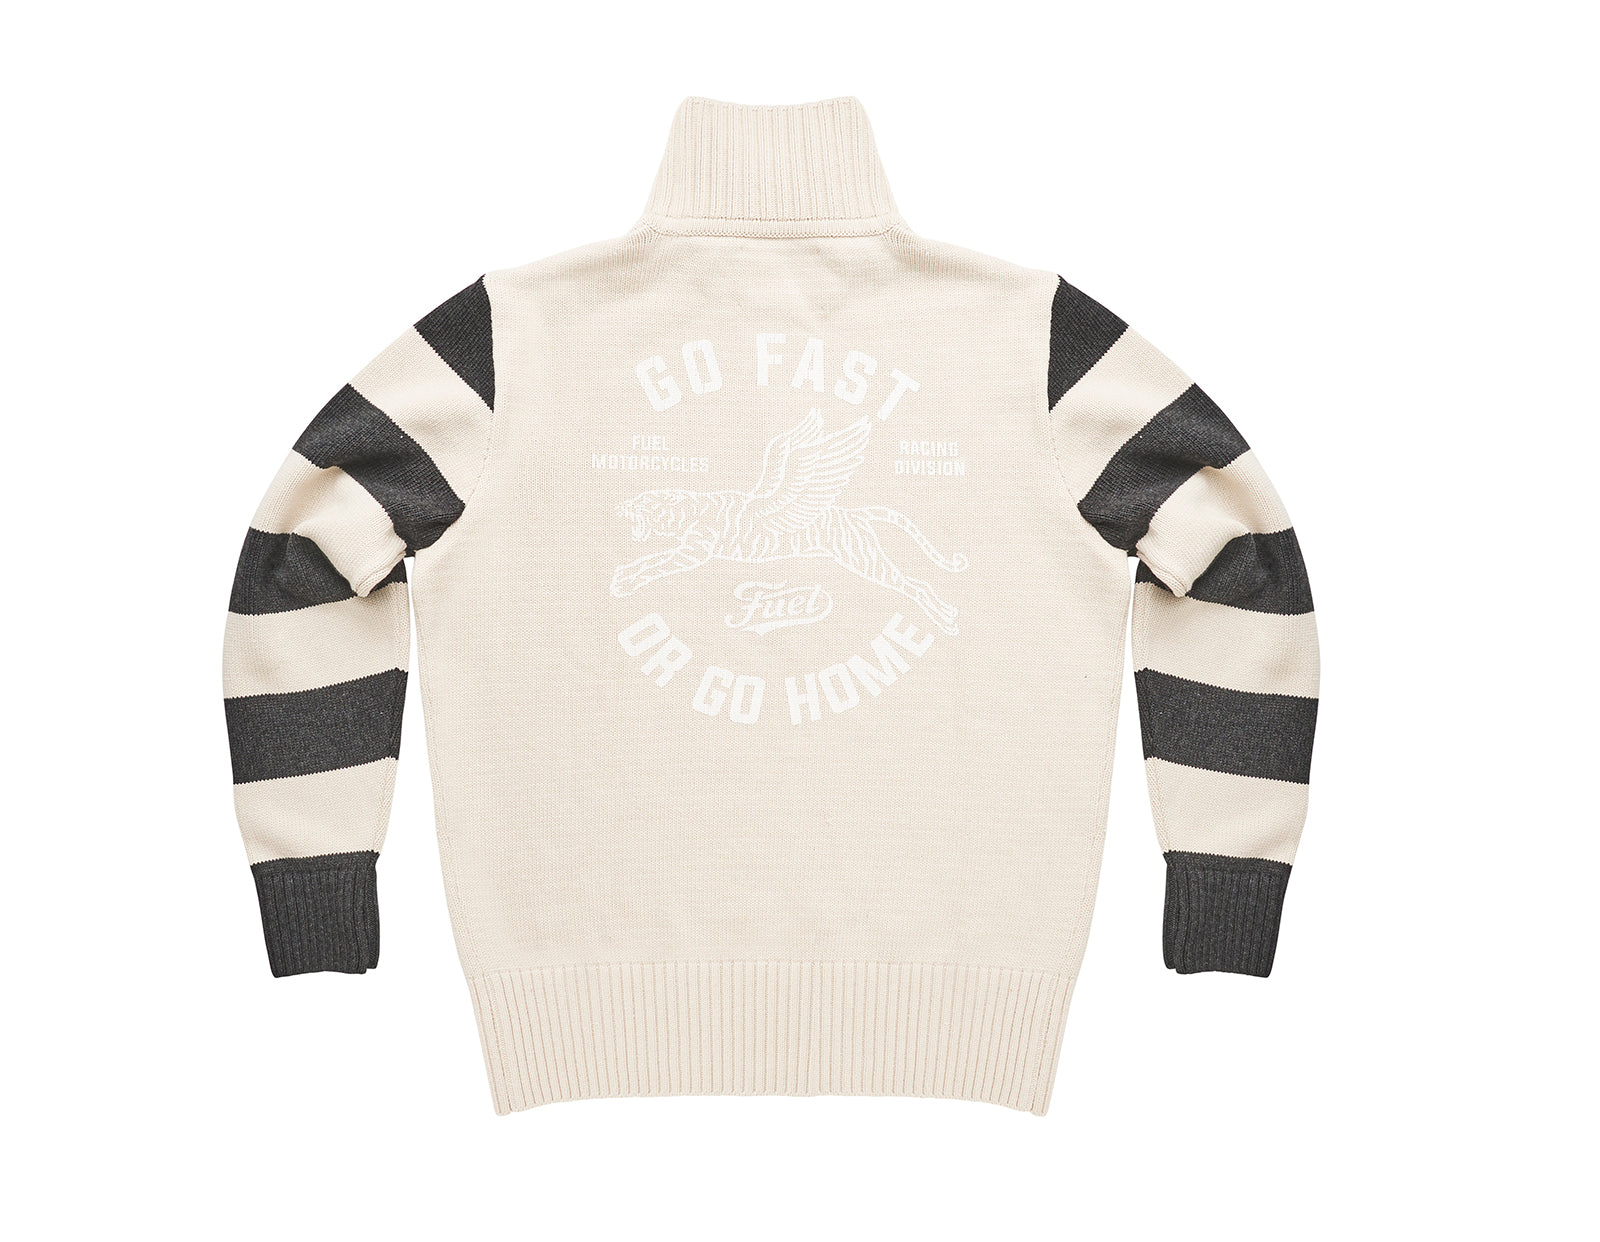 racing-division-sweater-back_1800x1800.jpg